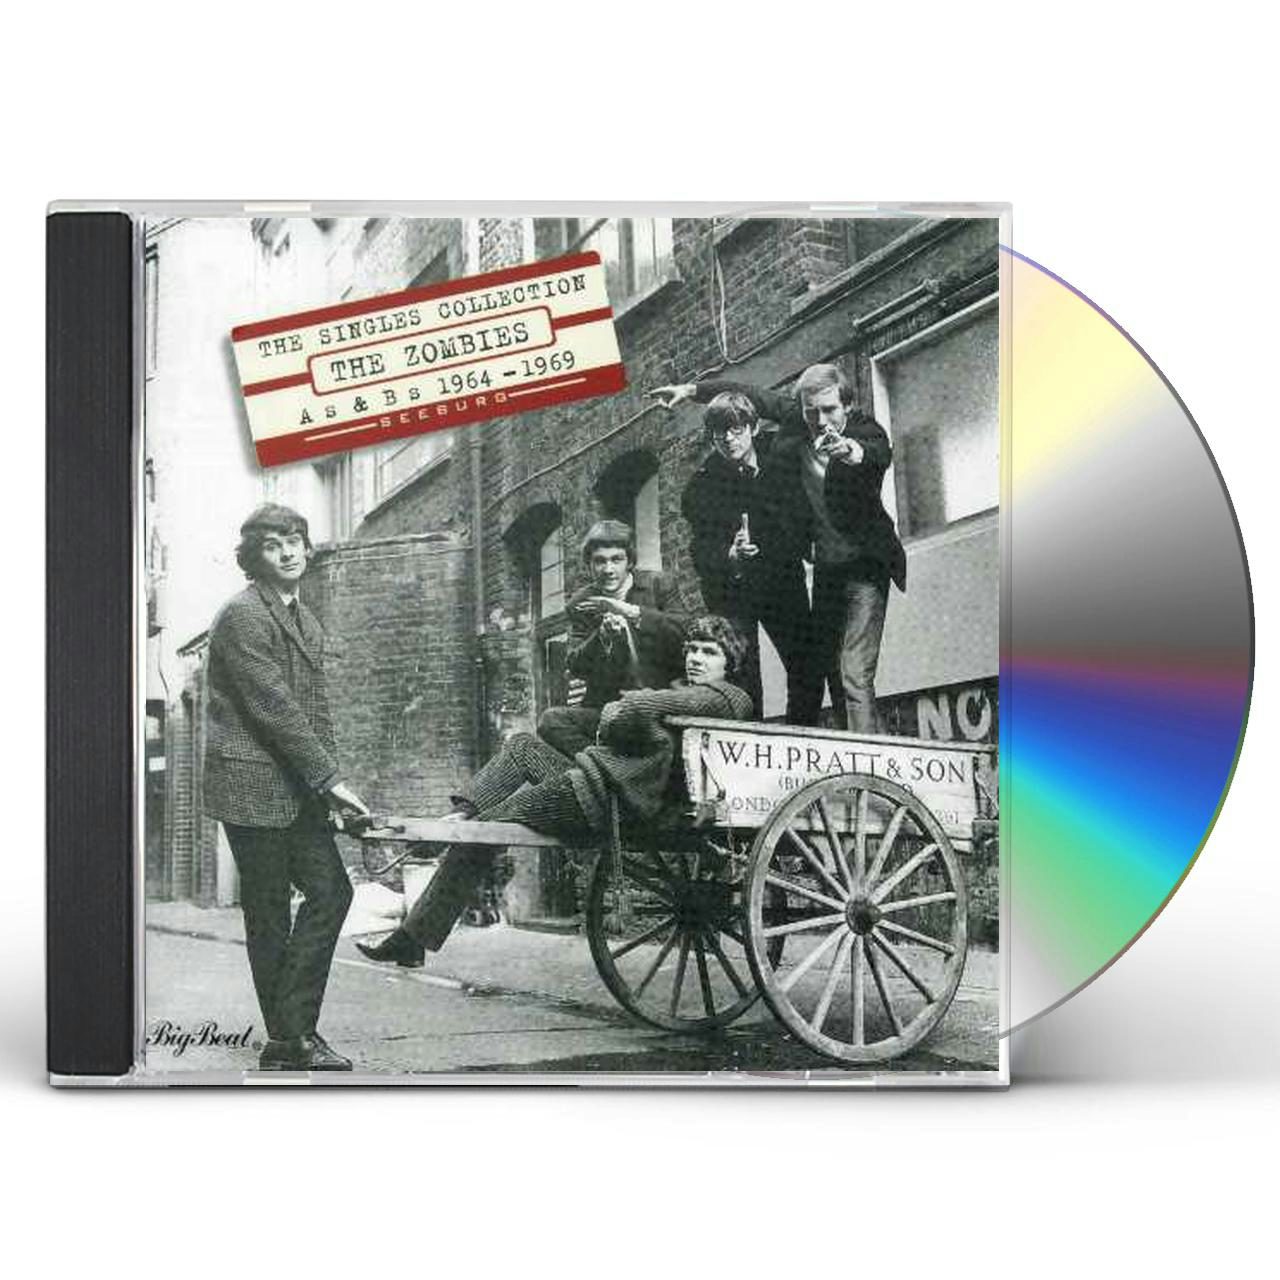 singles collection cd - The Zombies